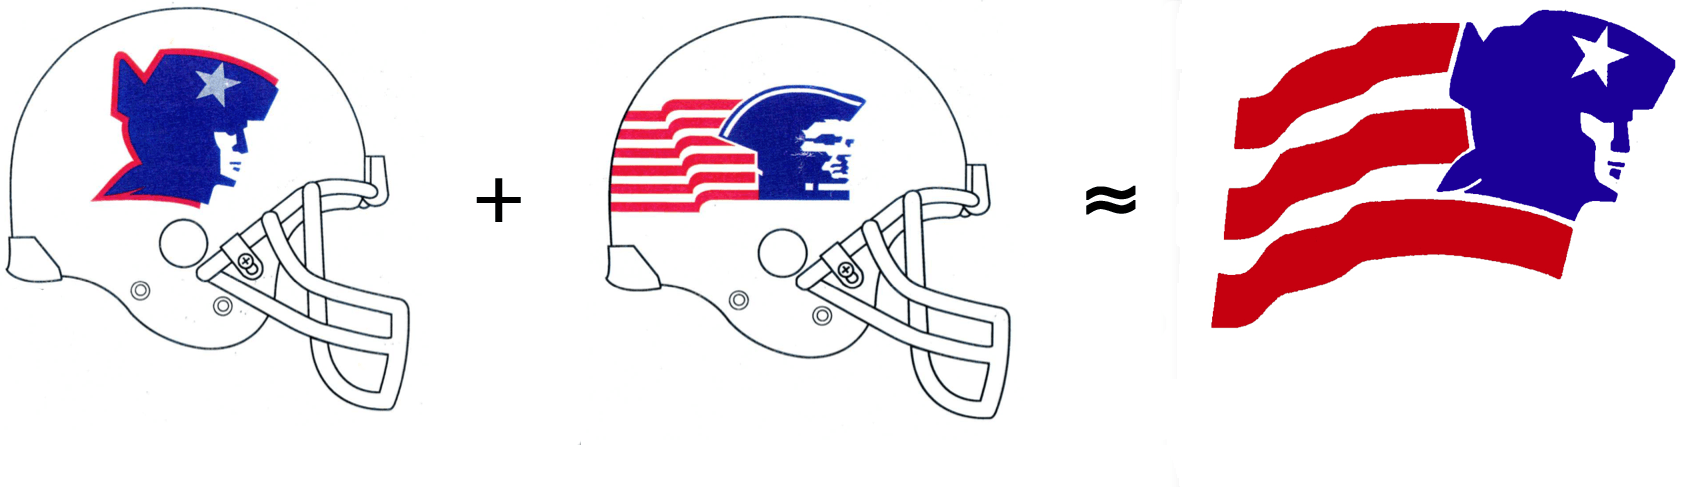 Old Patriots Logo - Uni Watch traces the lineage of the Patriots' 